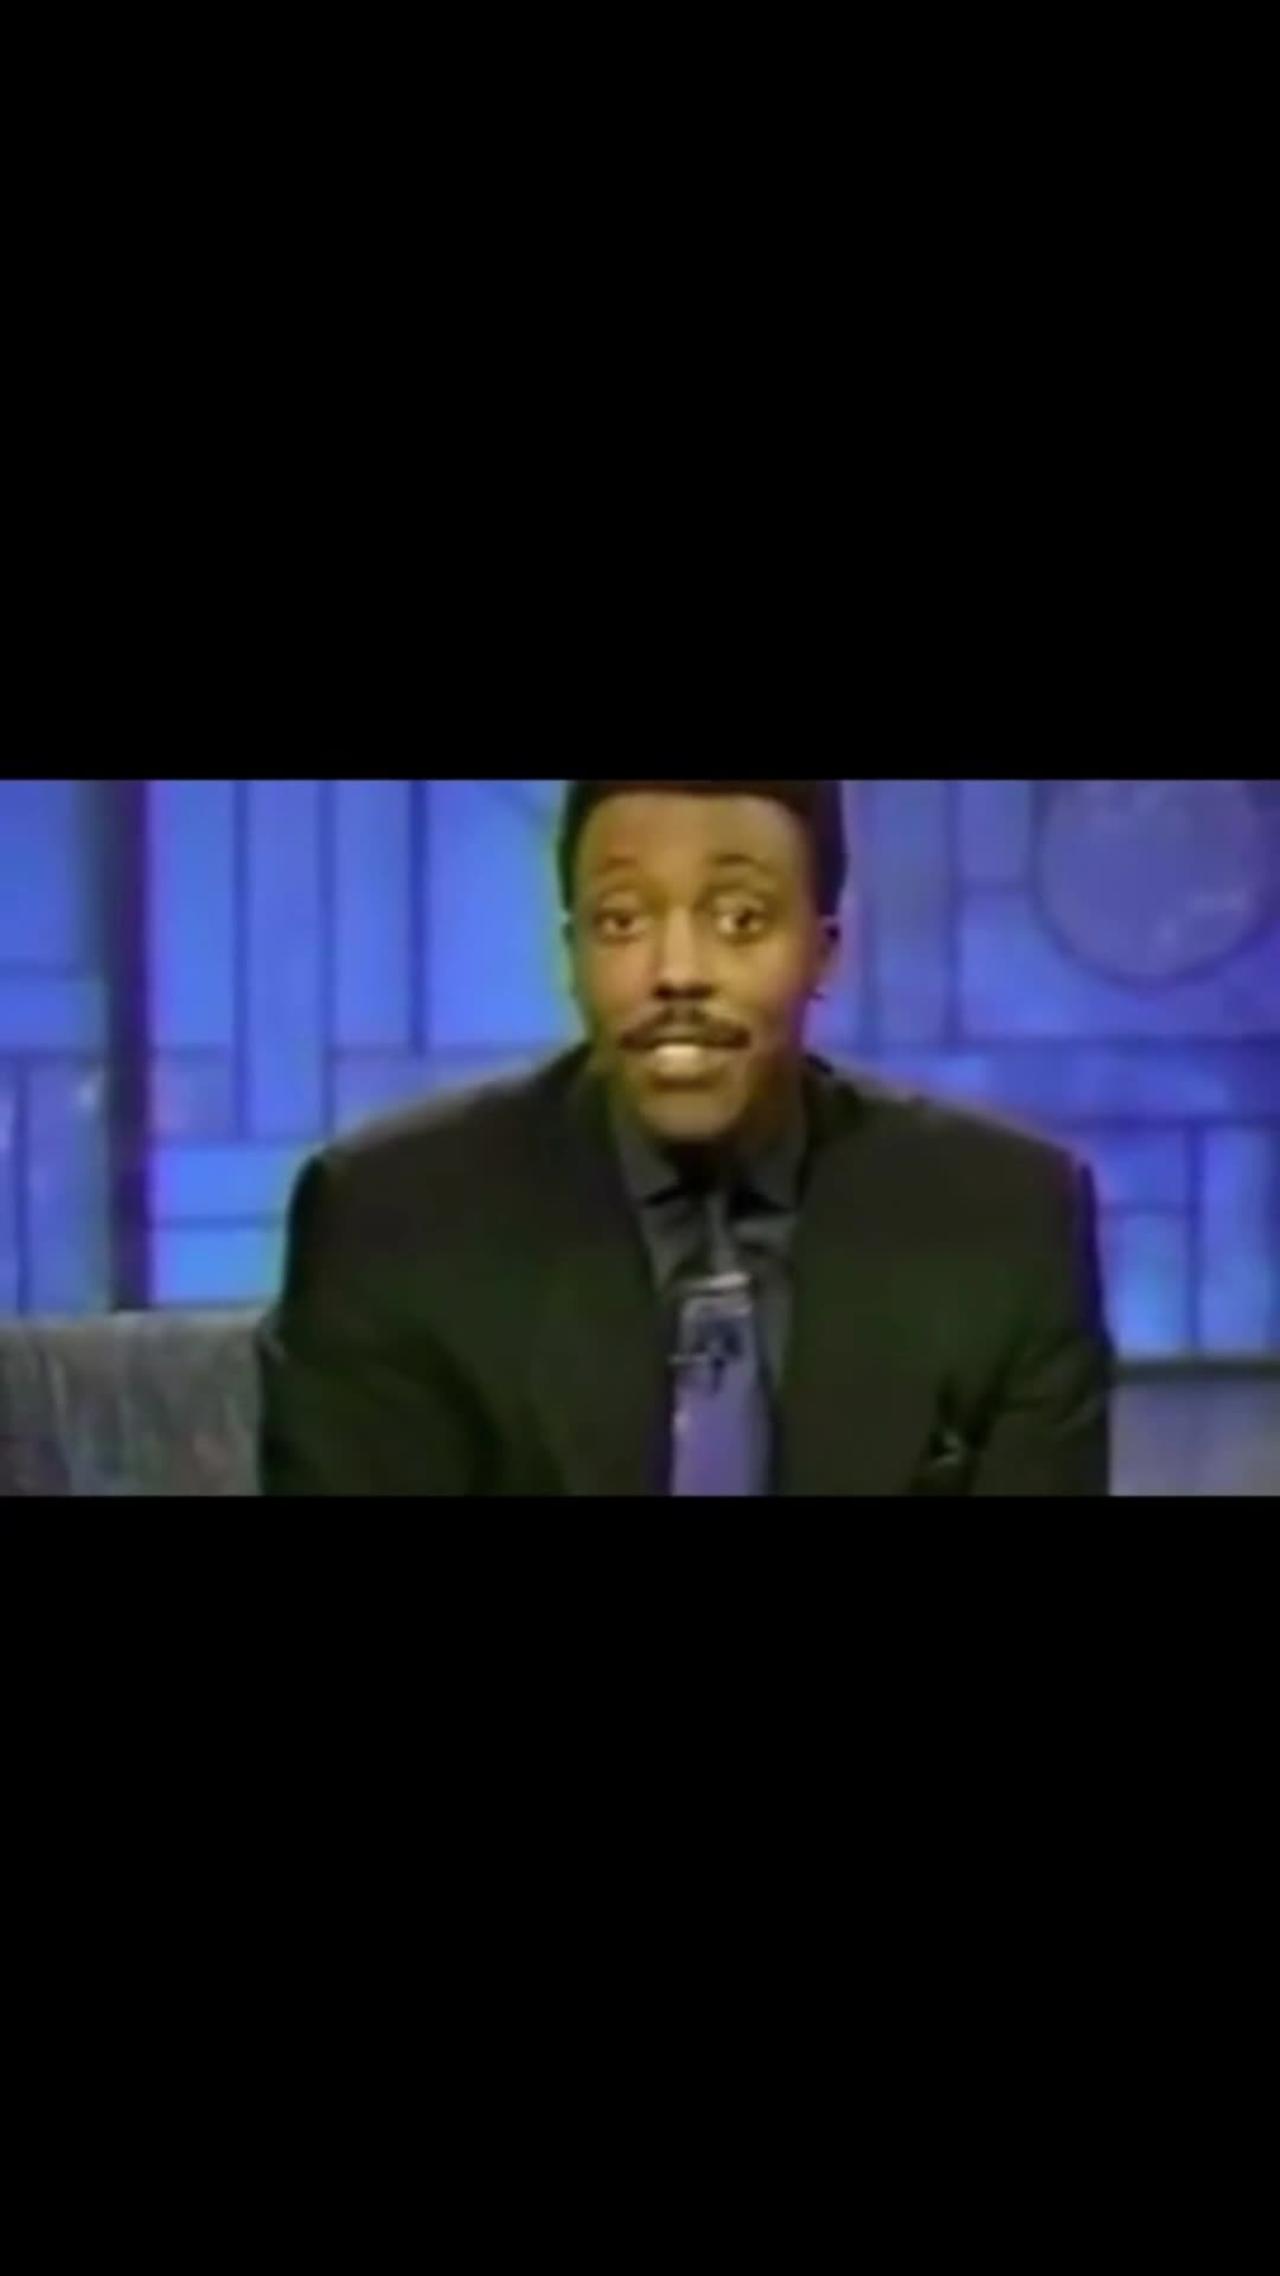 Jason’s late night talk show debut on ‘The Arsenio Hall Show